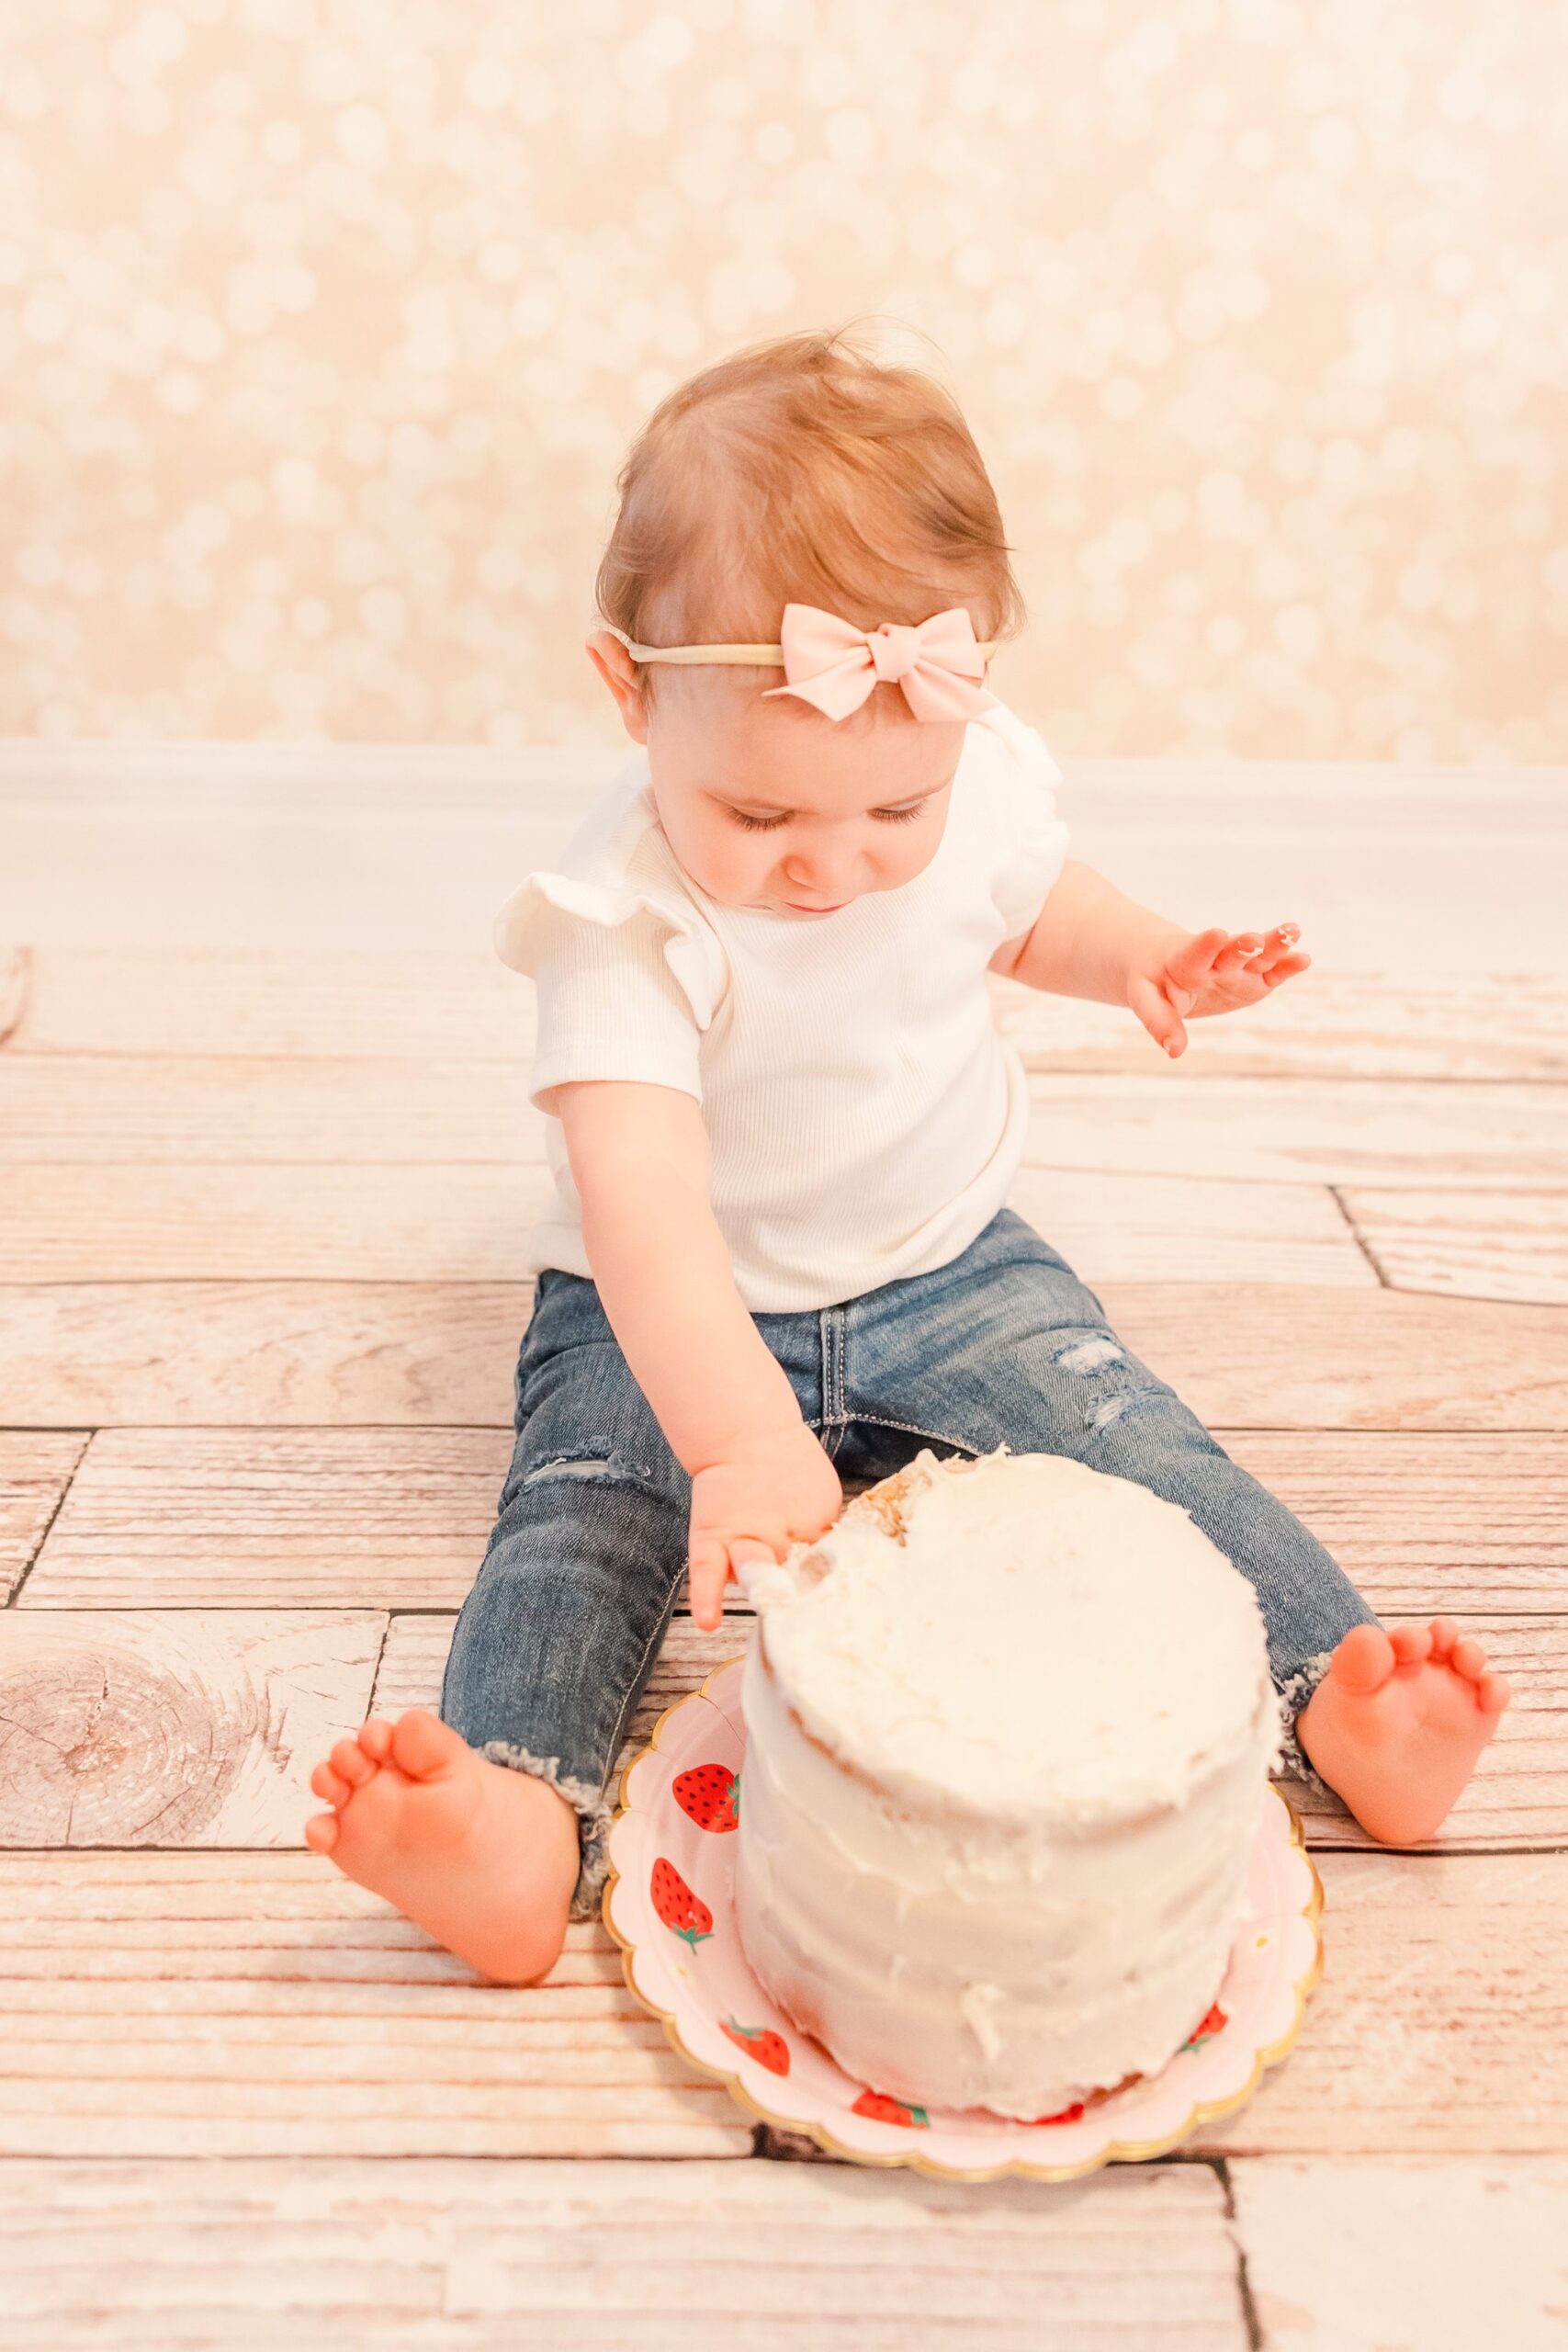 one year old in jeans smashing a white birthday cake